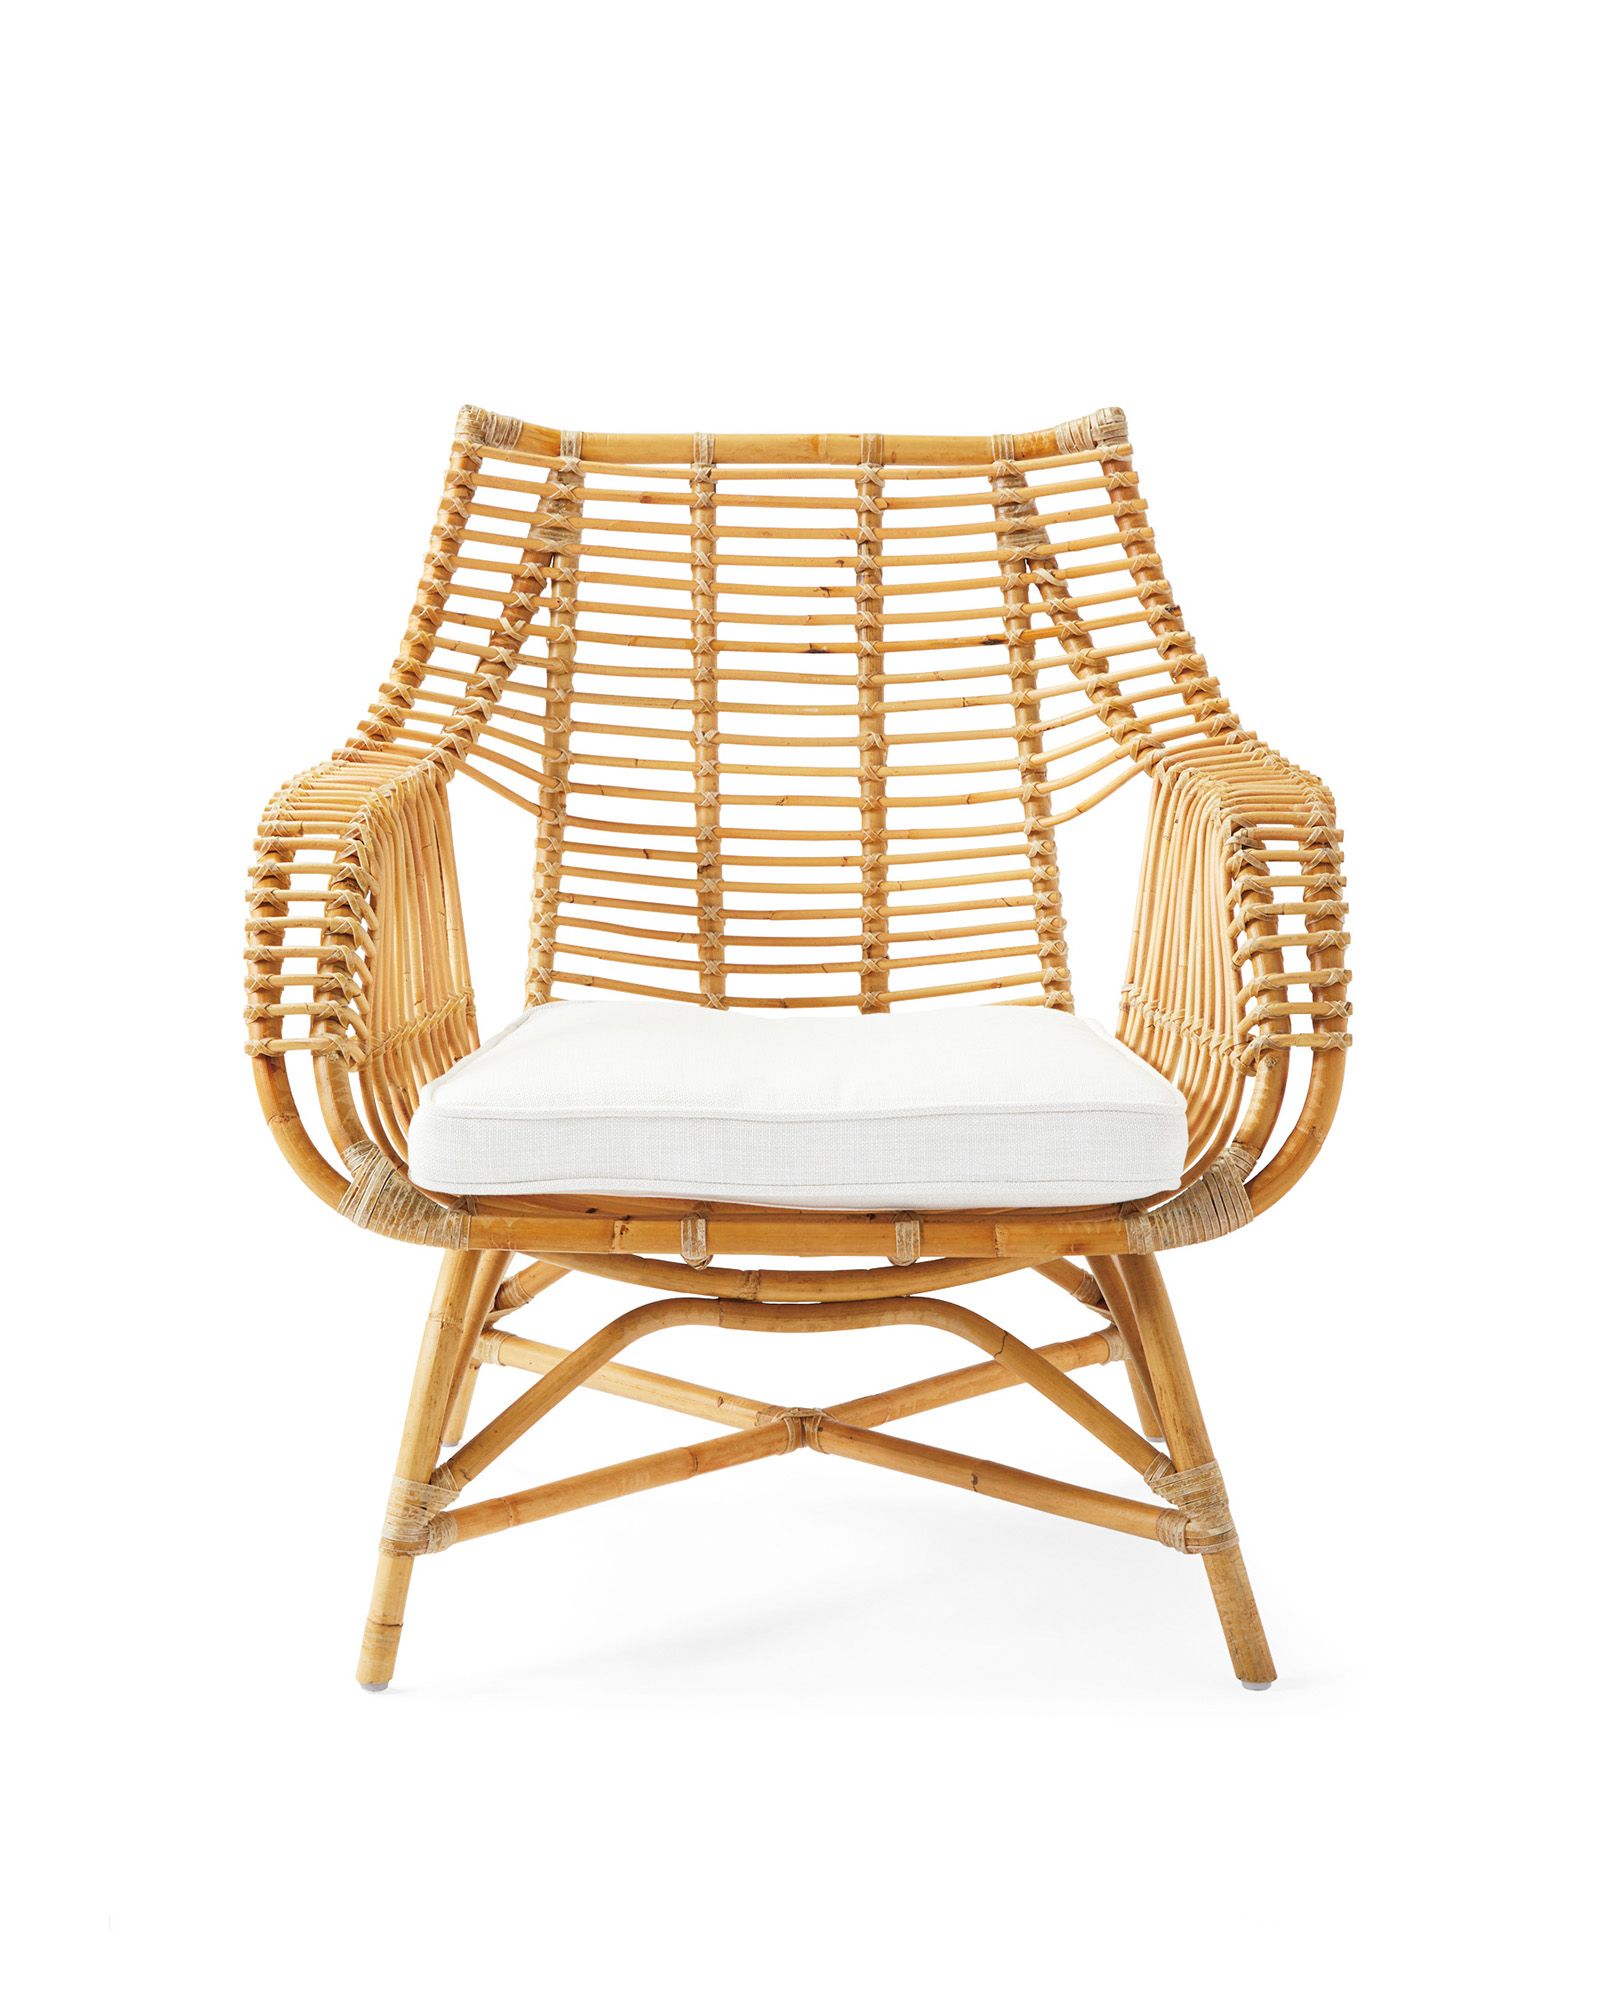 Venice Rattan Chair - Natural | Serena and Lily